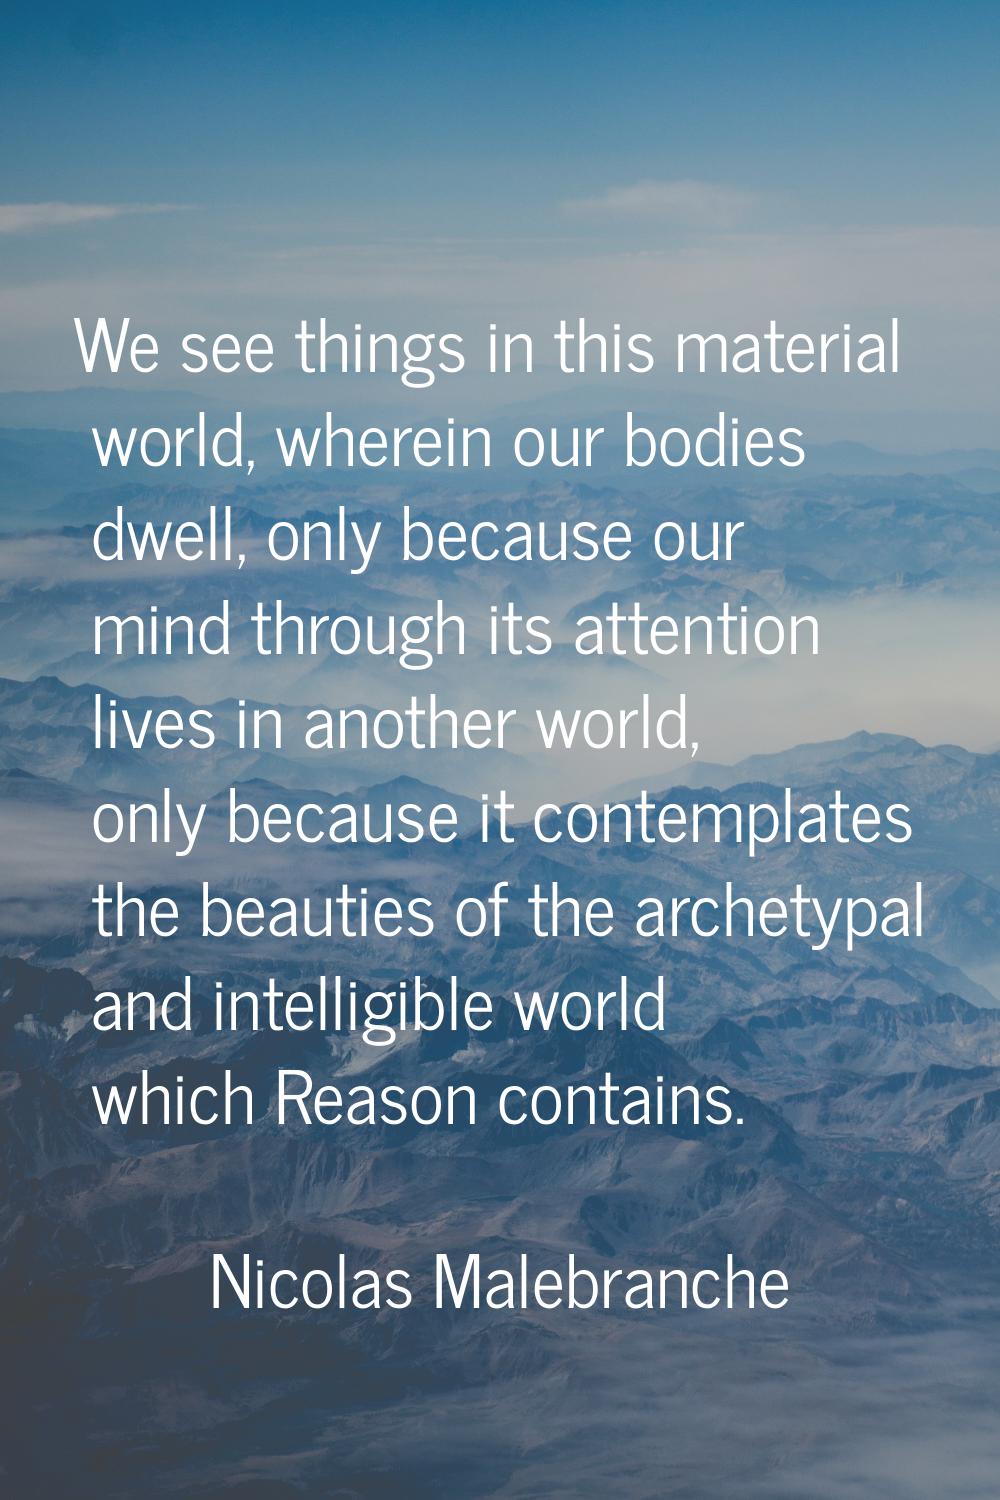 We see things in this material world, wherein our bodies dwell, only because our mind through its a